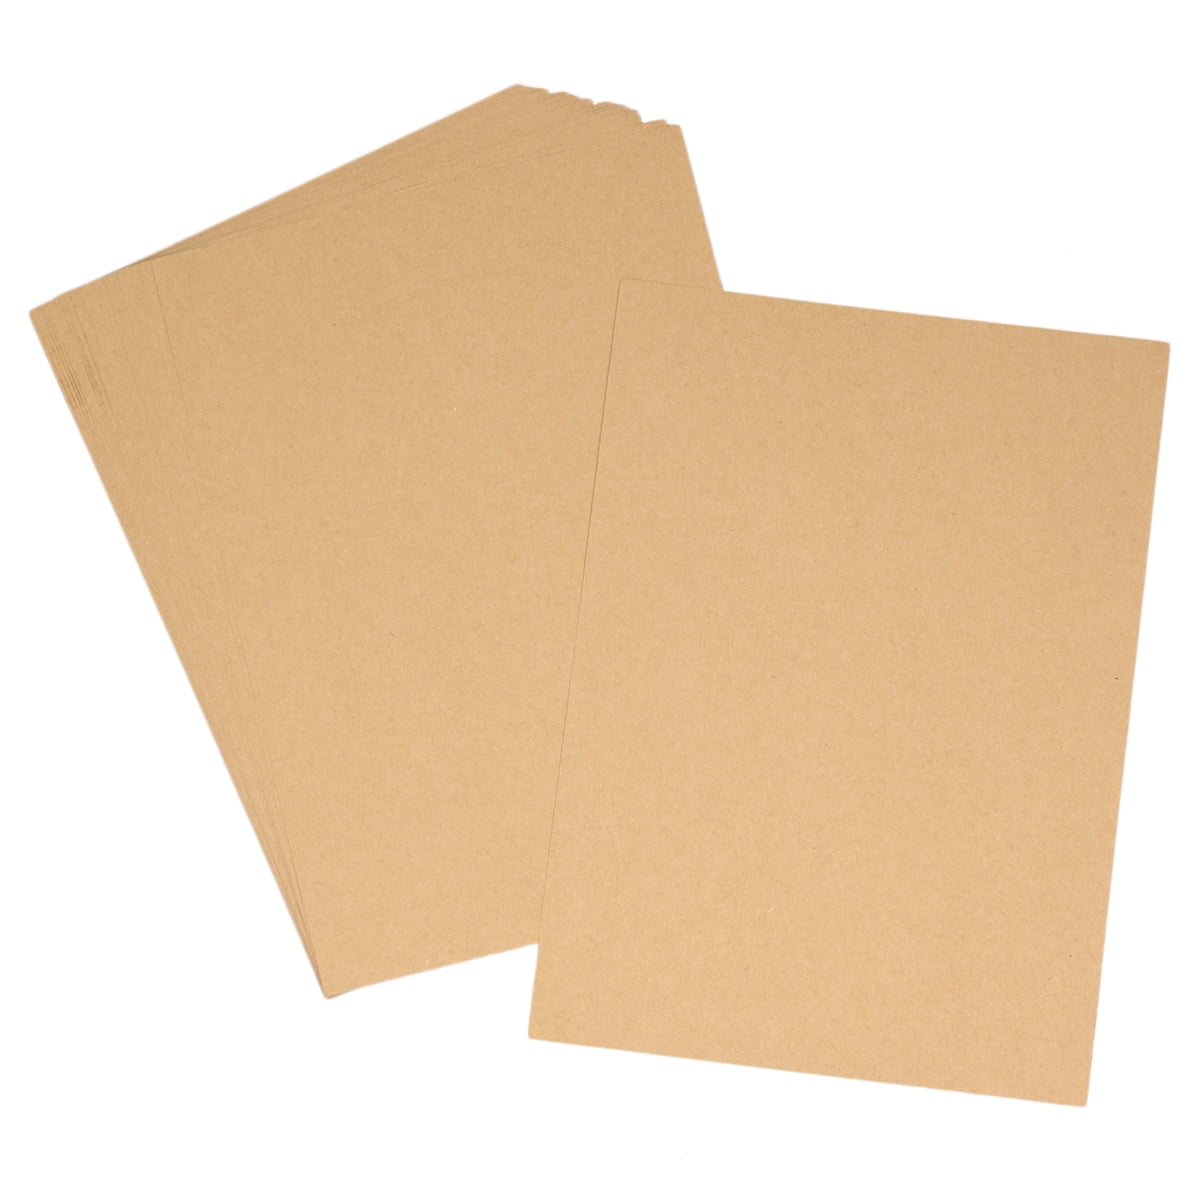  Card Stock, Black Stationary Paper for Post Cards and